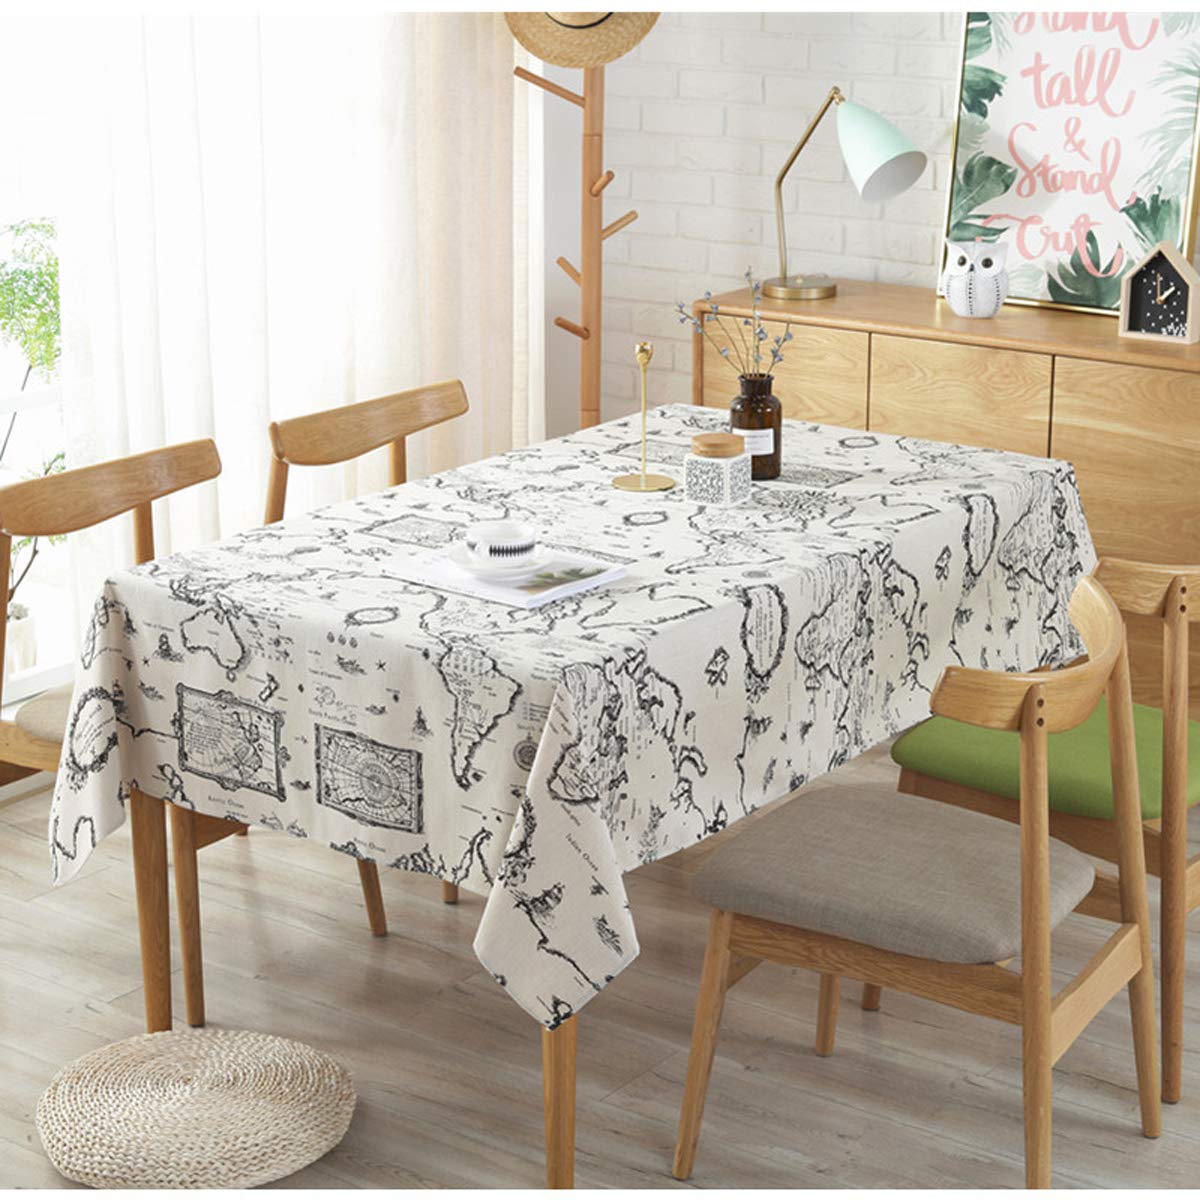 World Map Washable Tablecloth Vintage Rectangle（Square, 55 x 55 Inch）